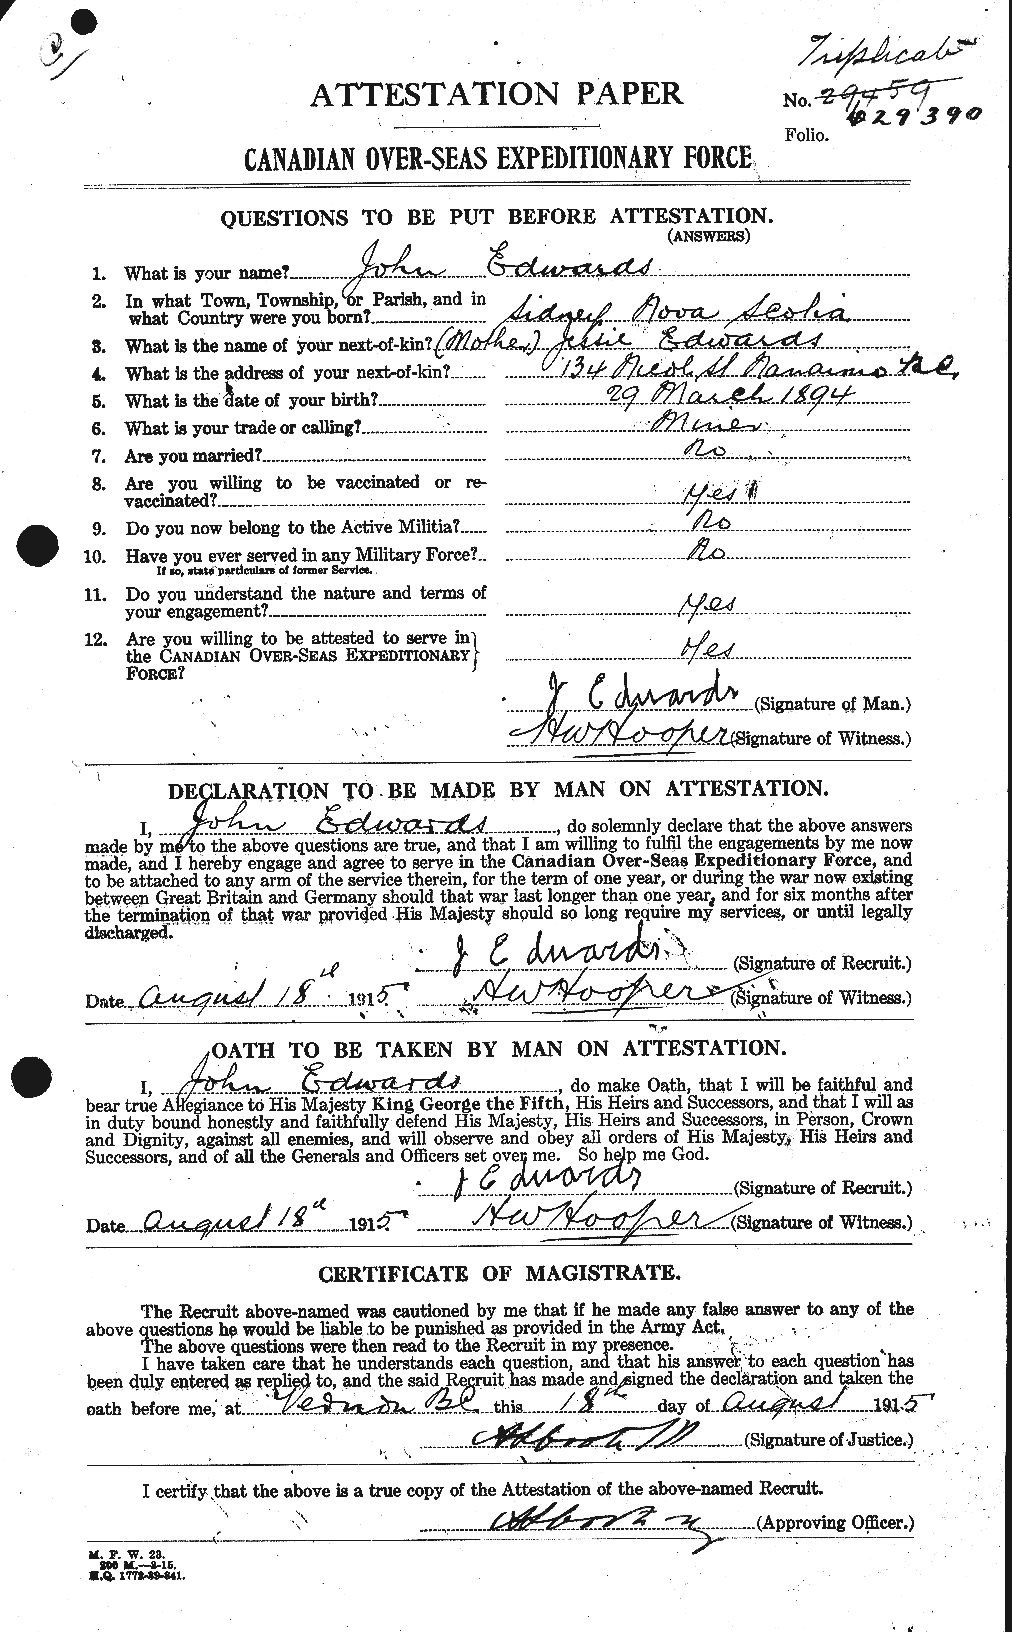 Personnel Records of the First World War - CEF 309833a